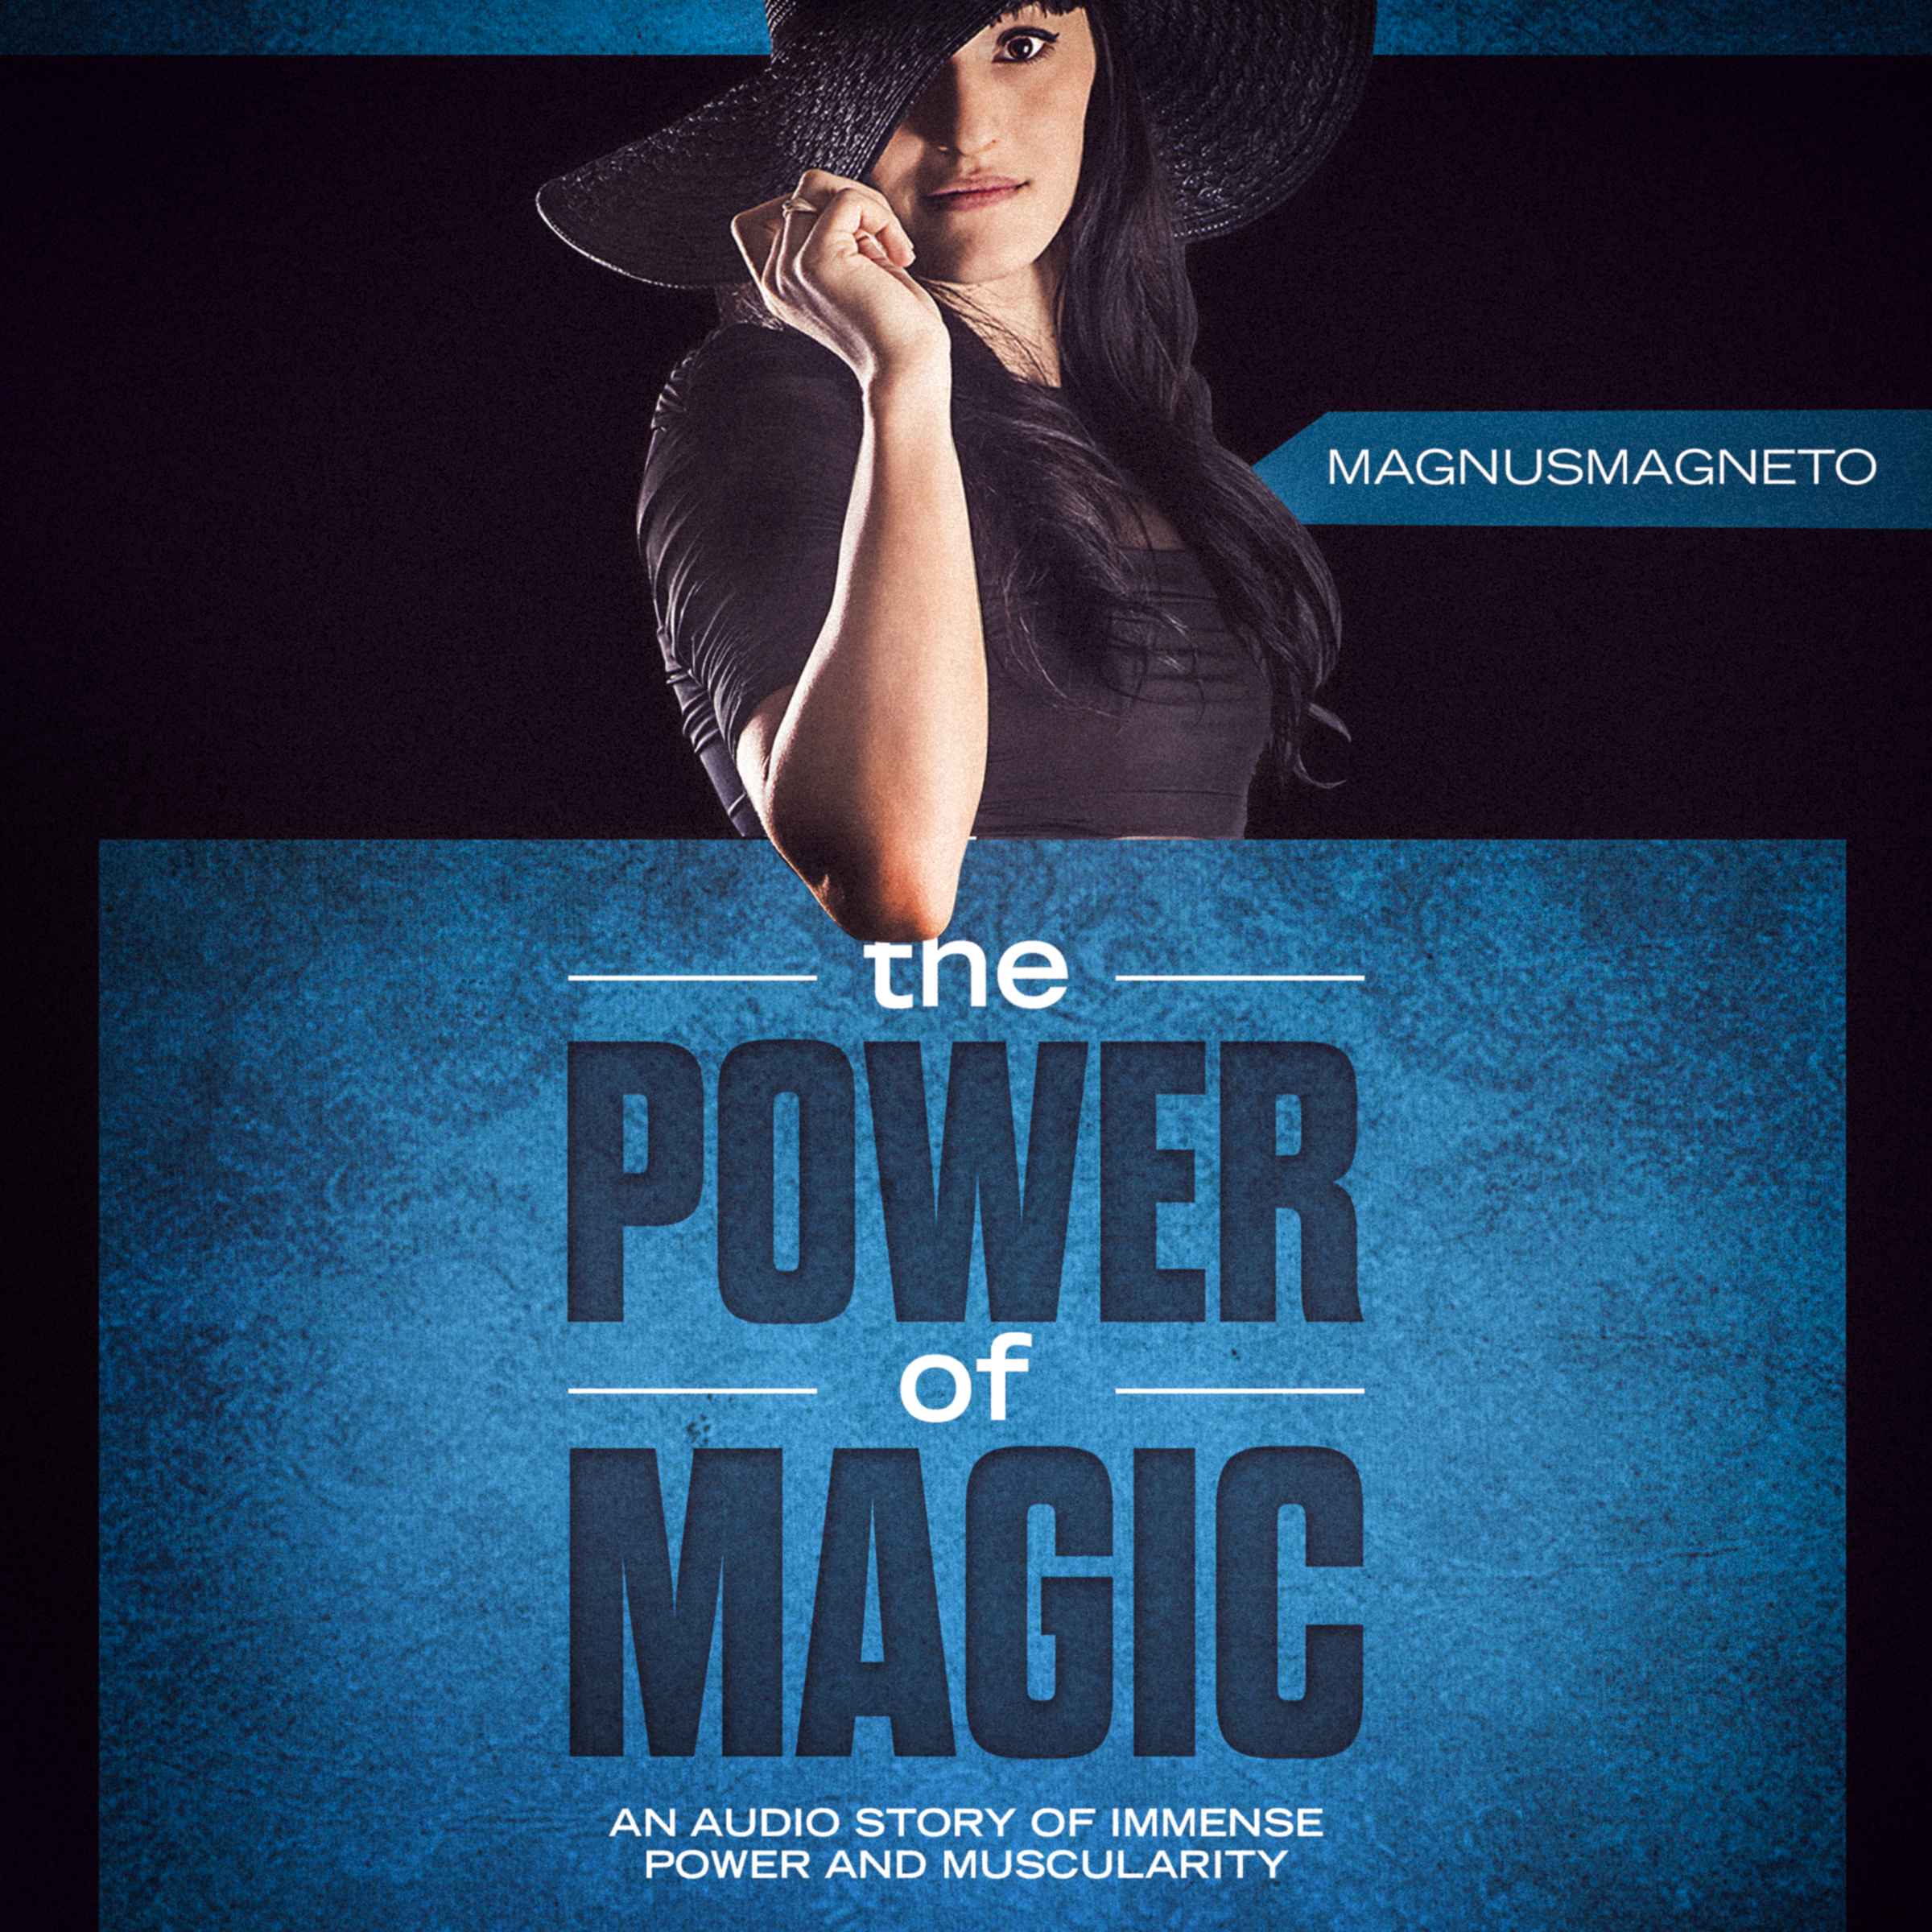 The Power of Magic Female Muscle Audio